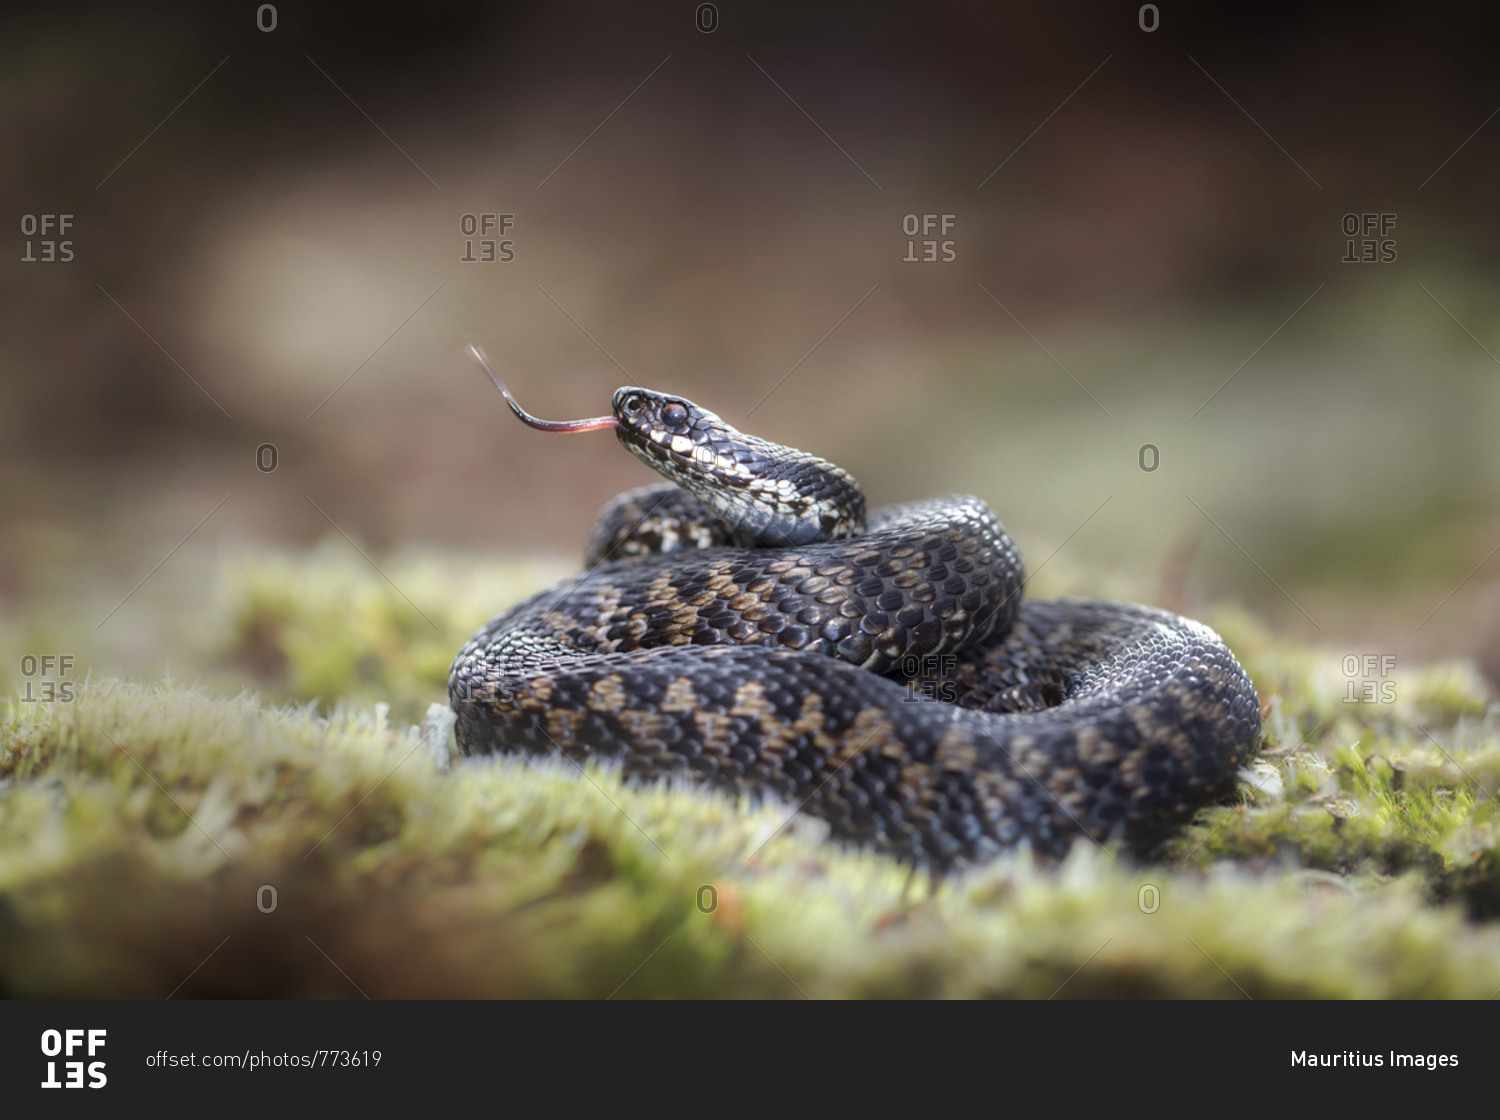 Adder on grass with forked tongue snake like